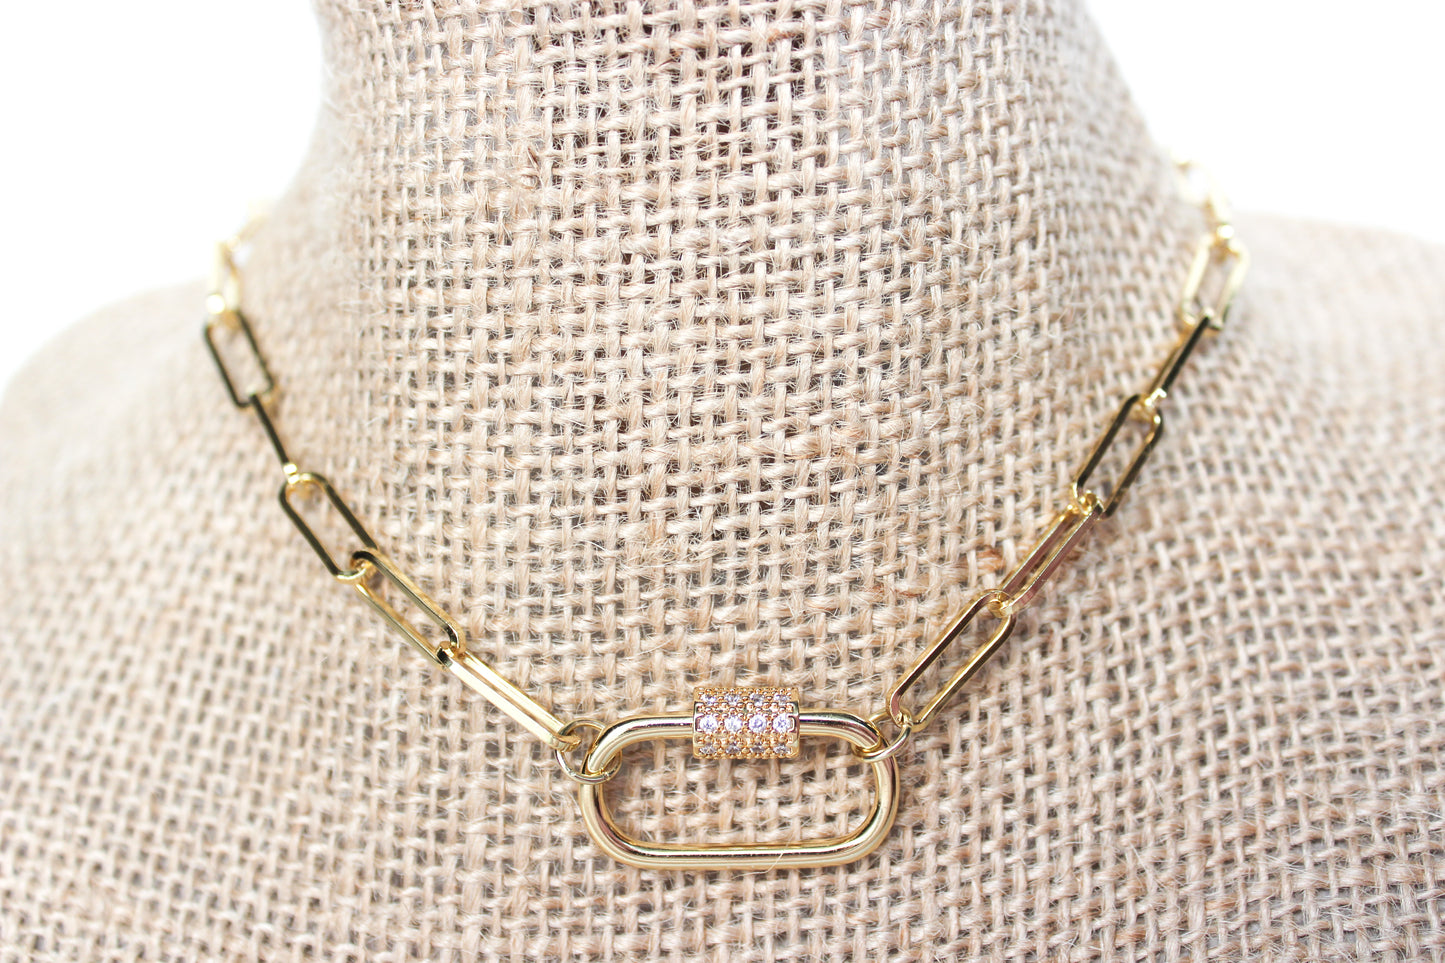 Gold Carabiner Clasp- Paperclip Chain